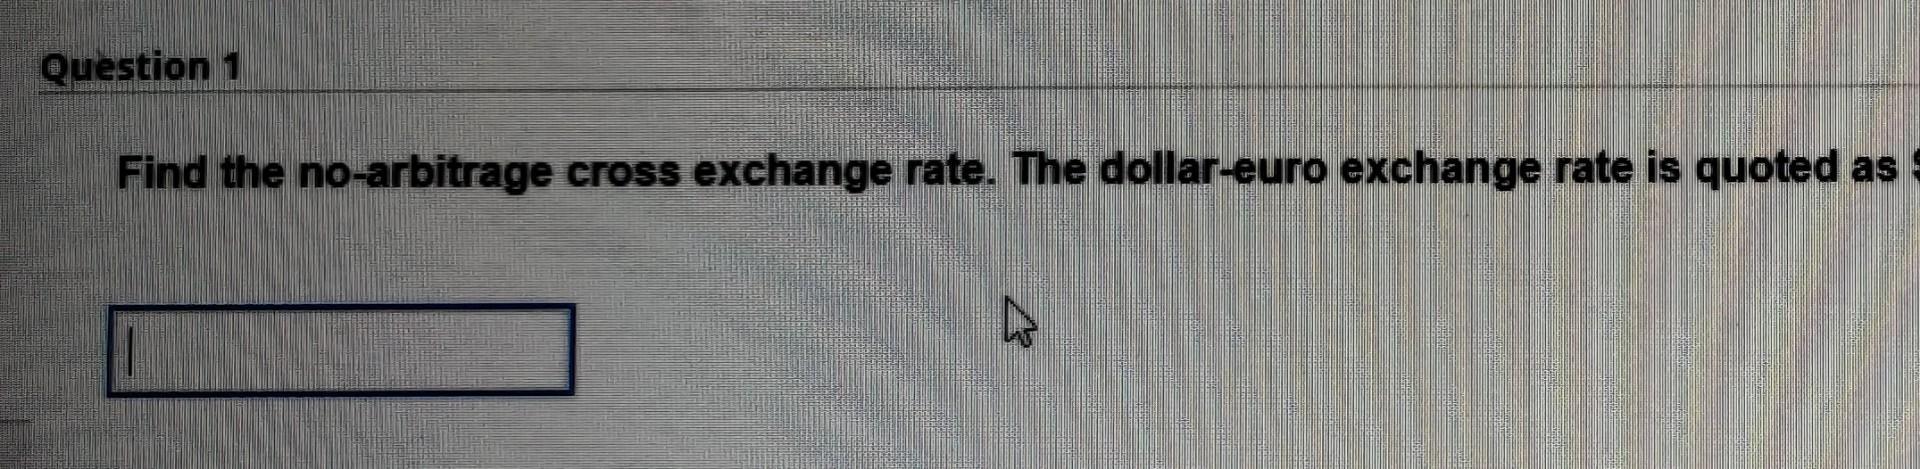 Question 1 Find the no-arbitrage cross exchange rate. The dollar-euro exchange rate is quoted as